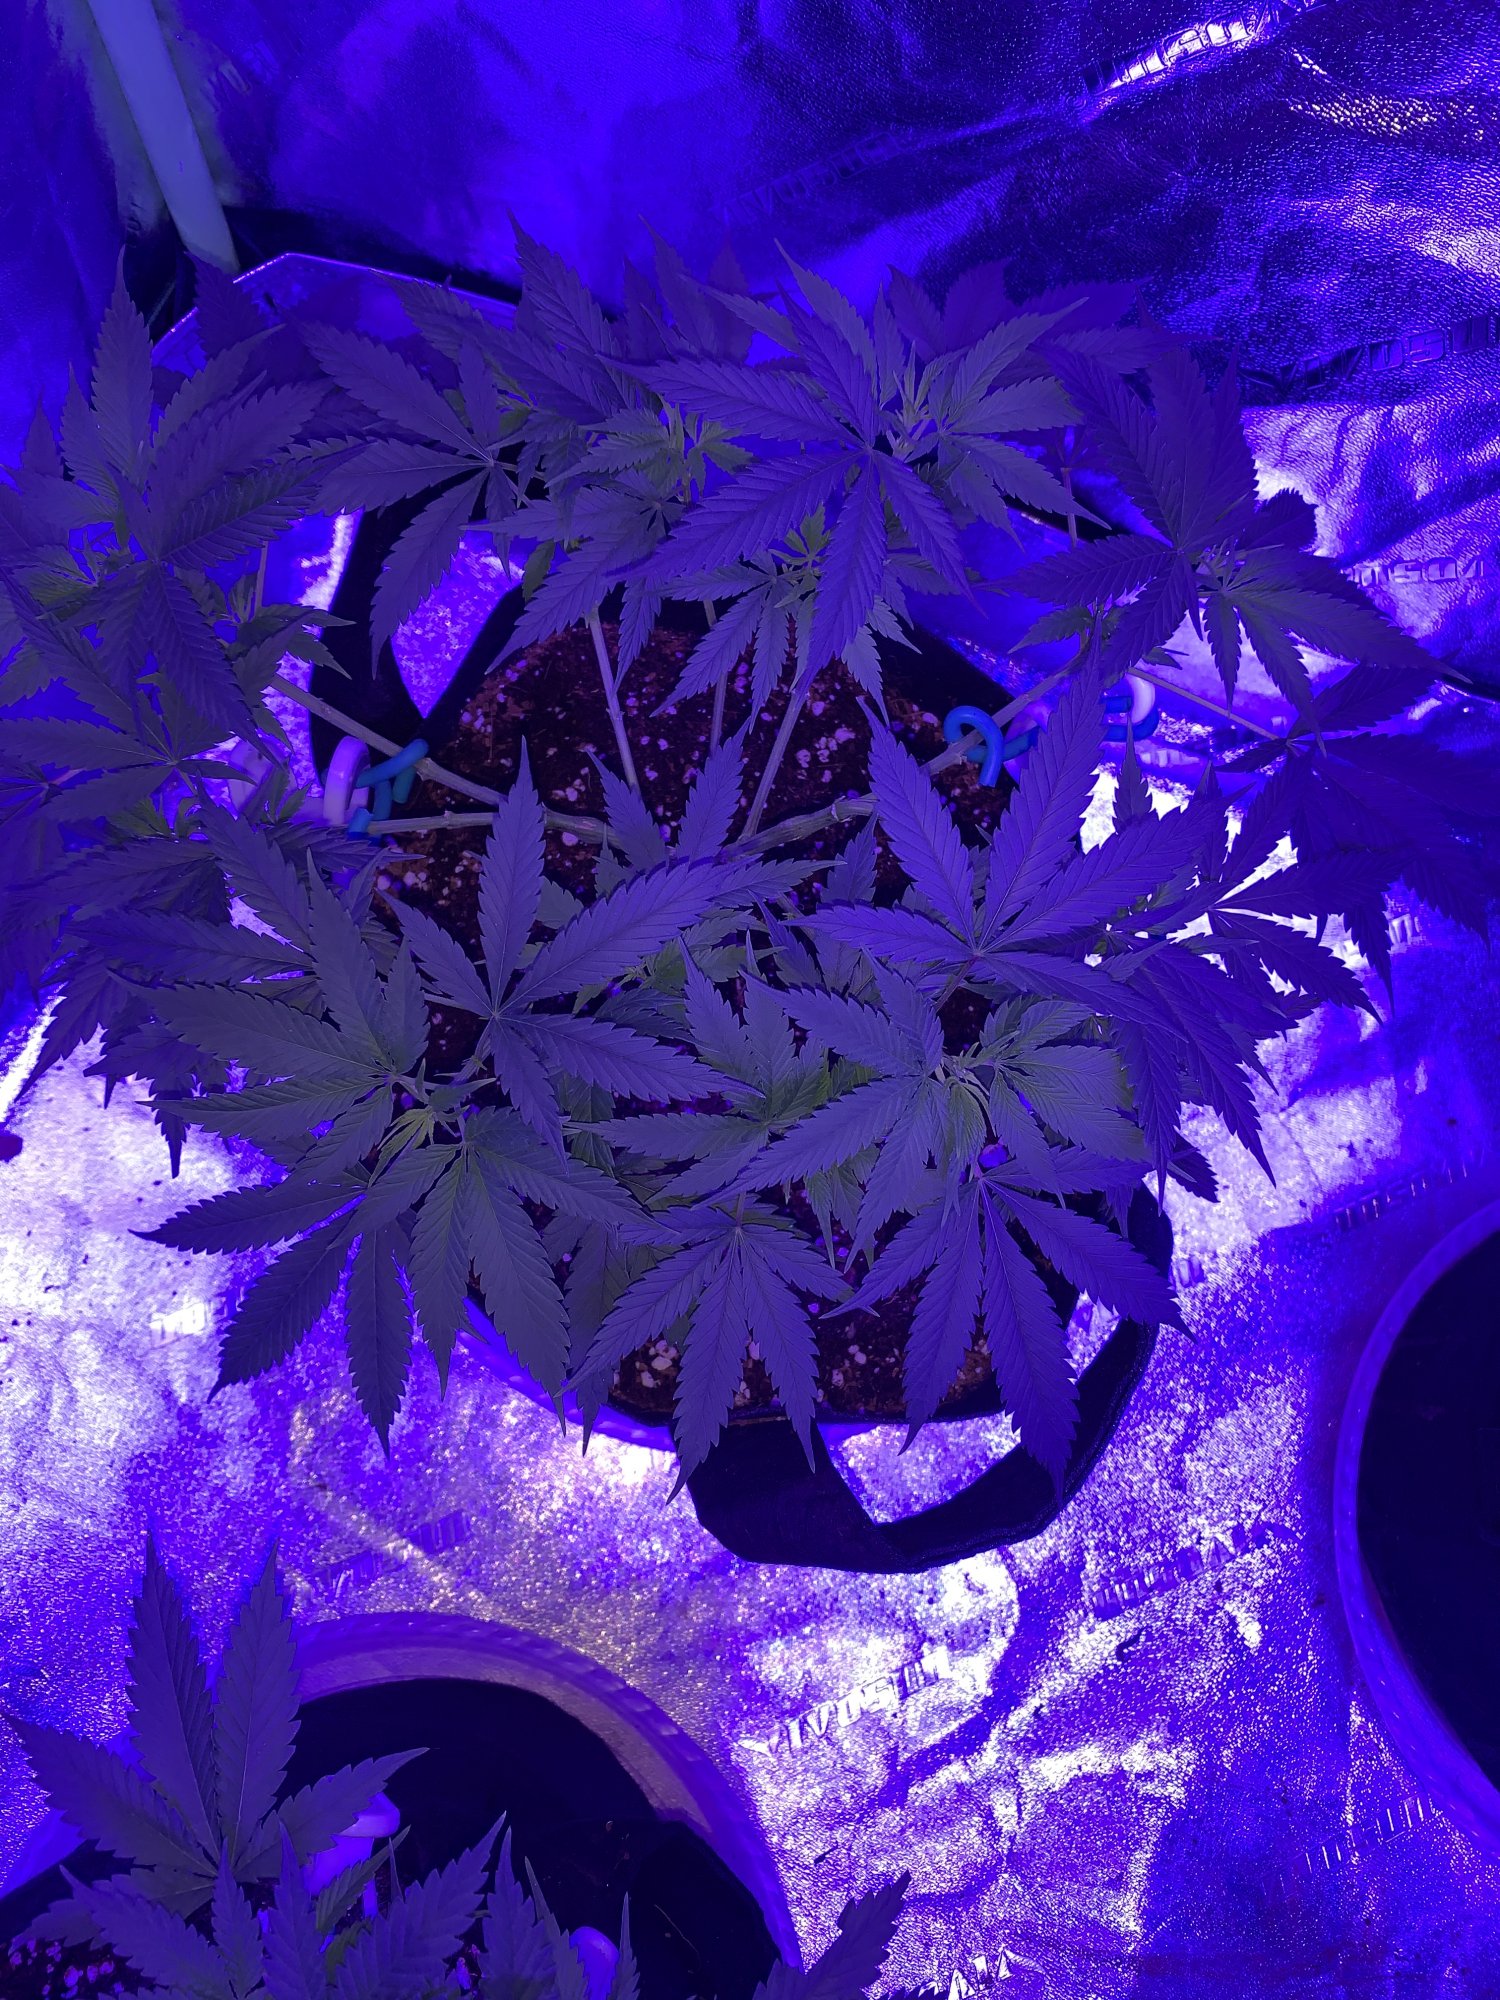 Are these too early to flip into flower 5